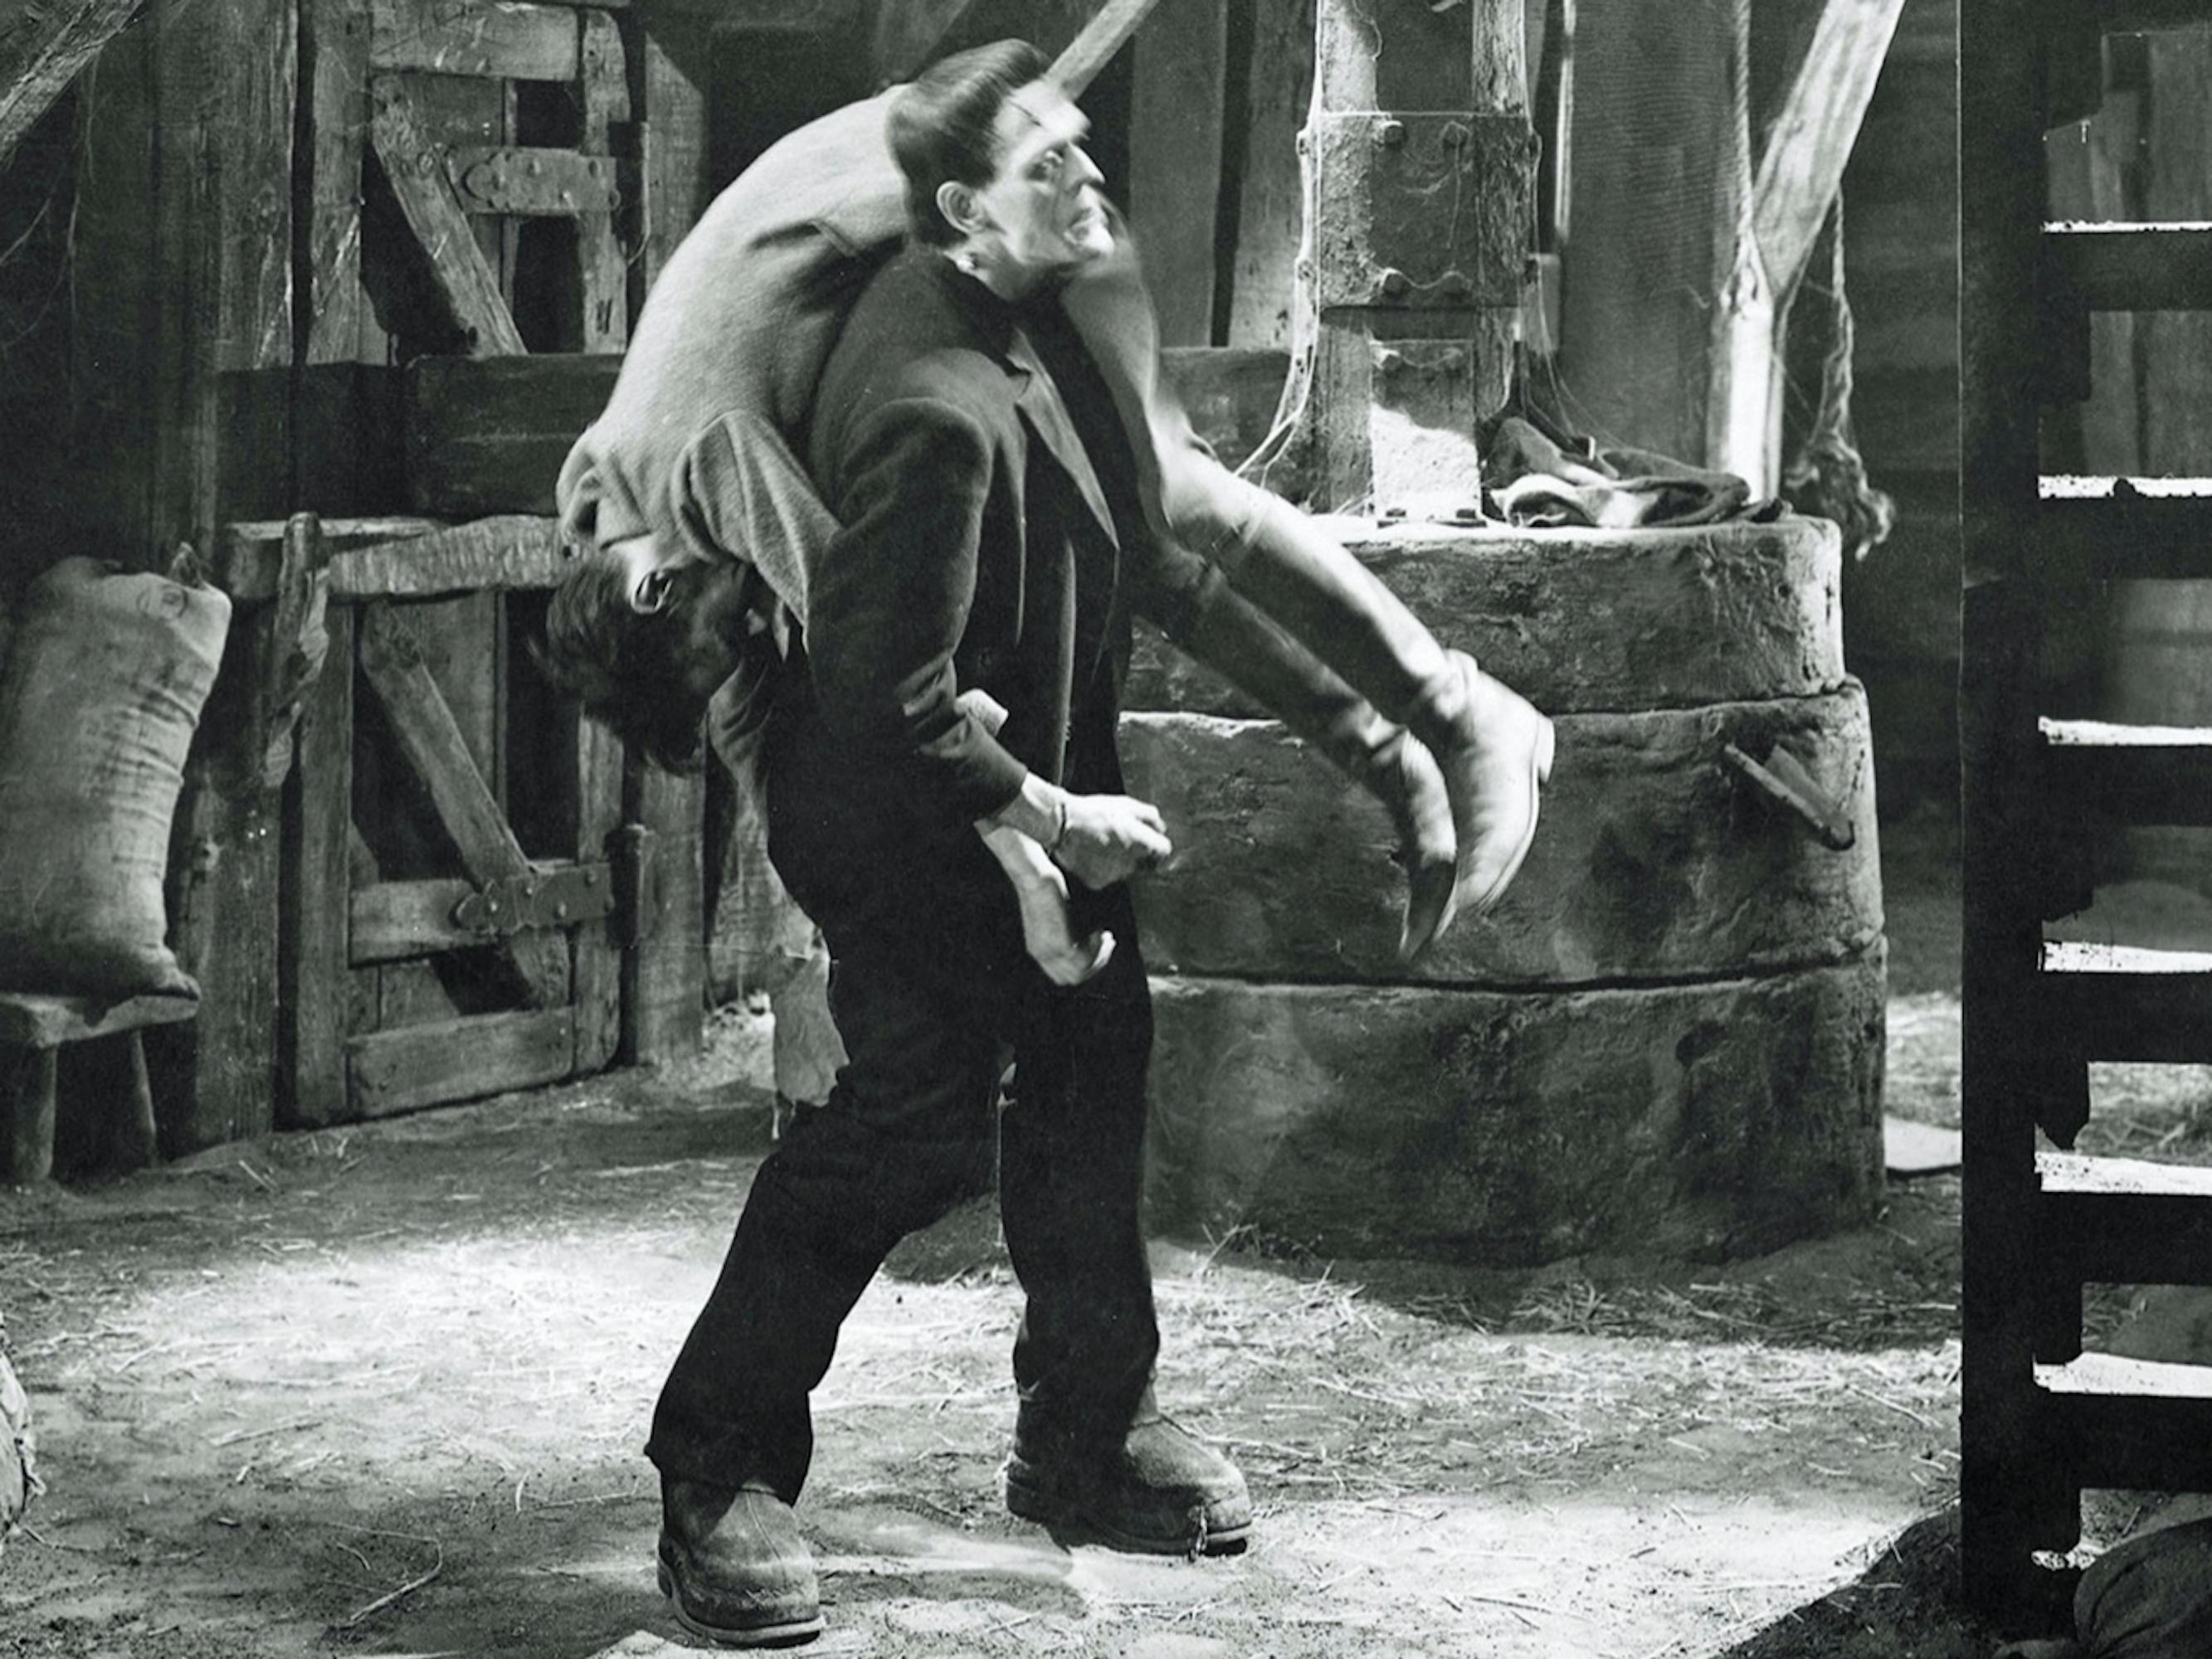 Henry Frankenstein (Colin Clive) in Frankenstein. Frankenstein carries a body over his shoulders through a dusty barn-like building.